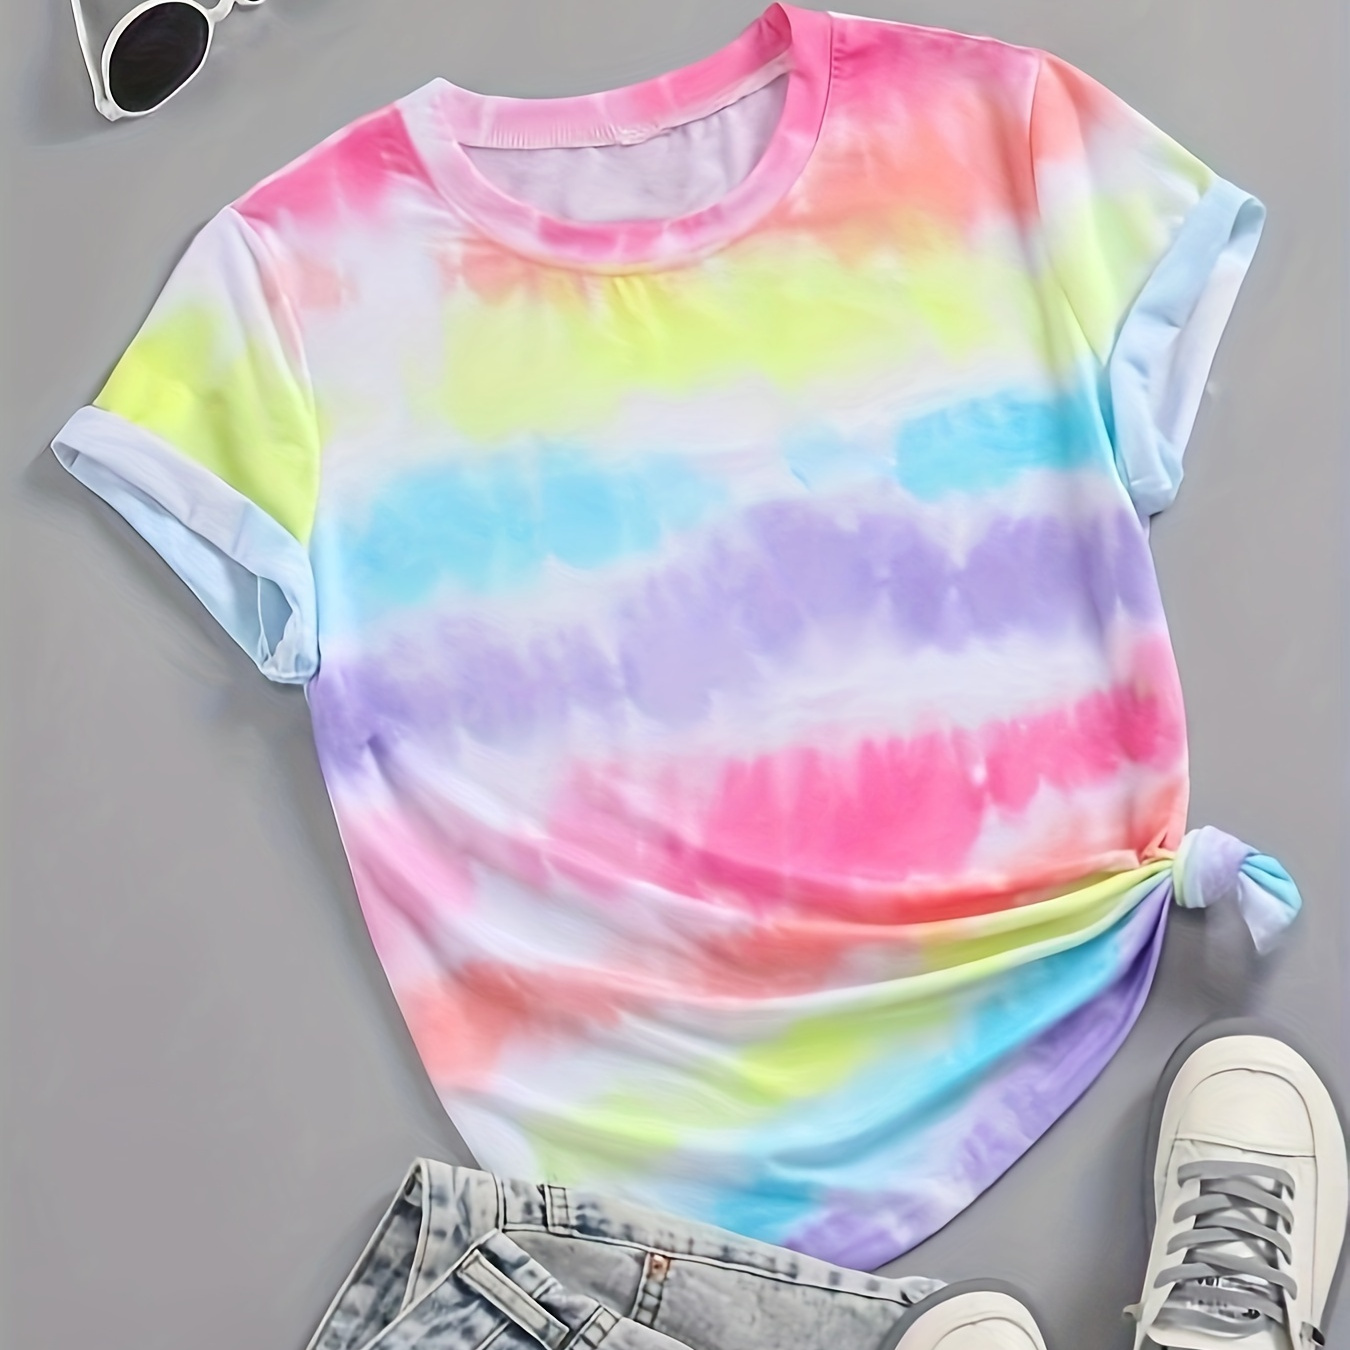 

Gradient Print Crew Neck T-shirt, Casual Short Sleeve T-shirt For Spring & Summer, Women's Clothing